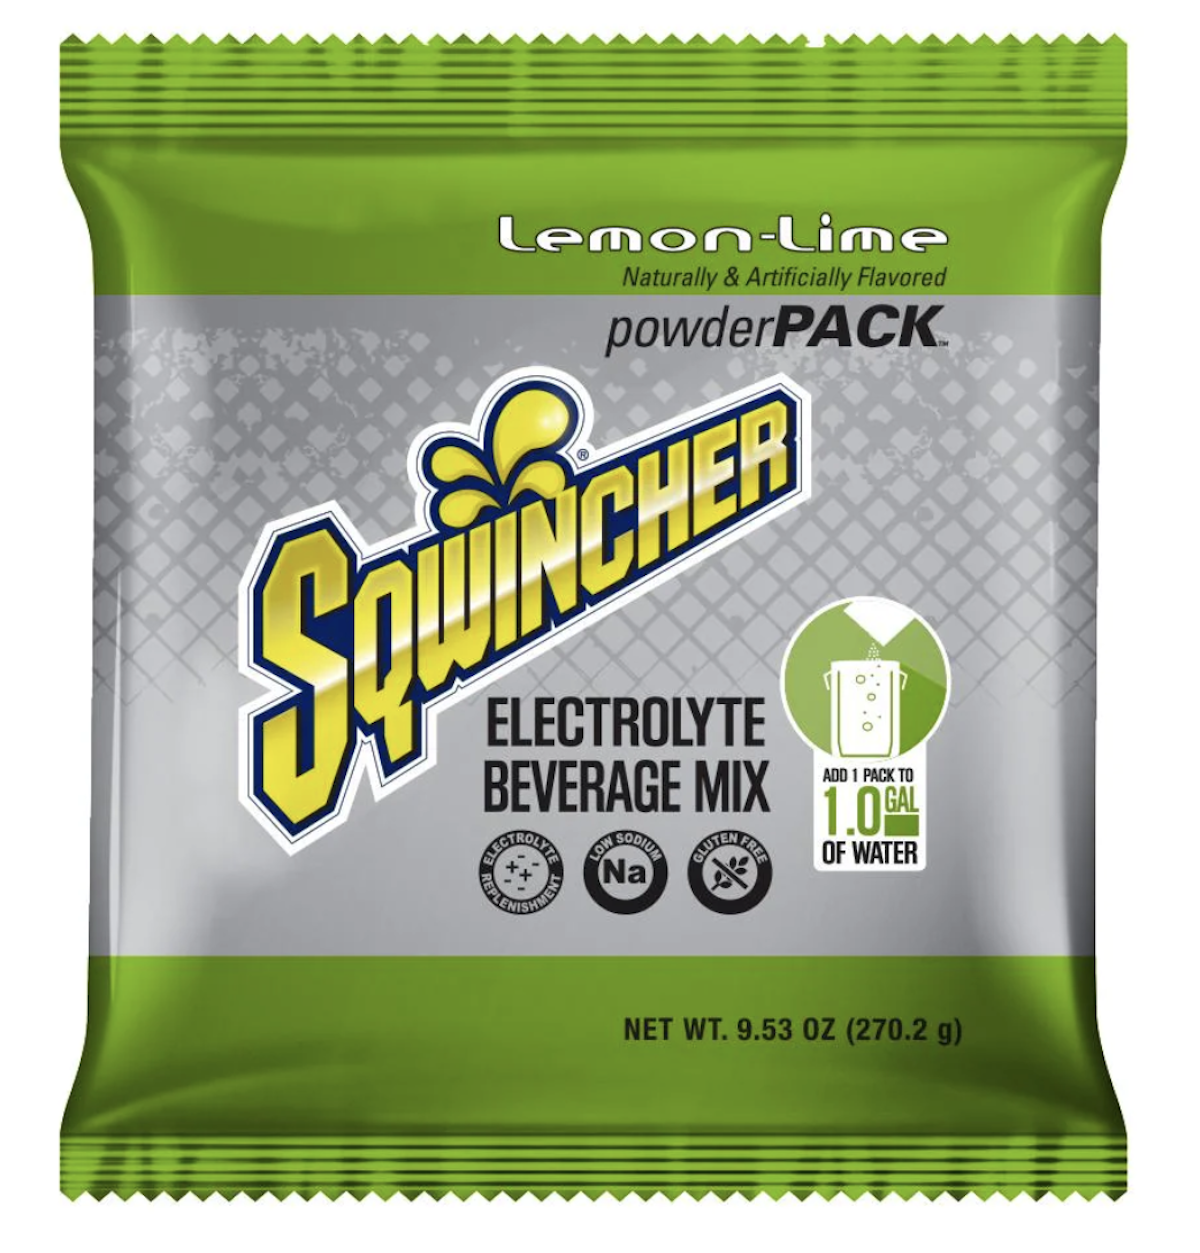 Sqwincher PowderPack Professional Grade Hydration Electrolyte Replenishment Drink Mix, Assorted Flavors, 9.53 oz., X384-MC600, Box of 20